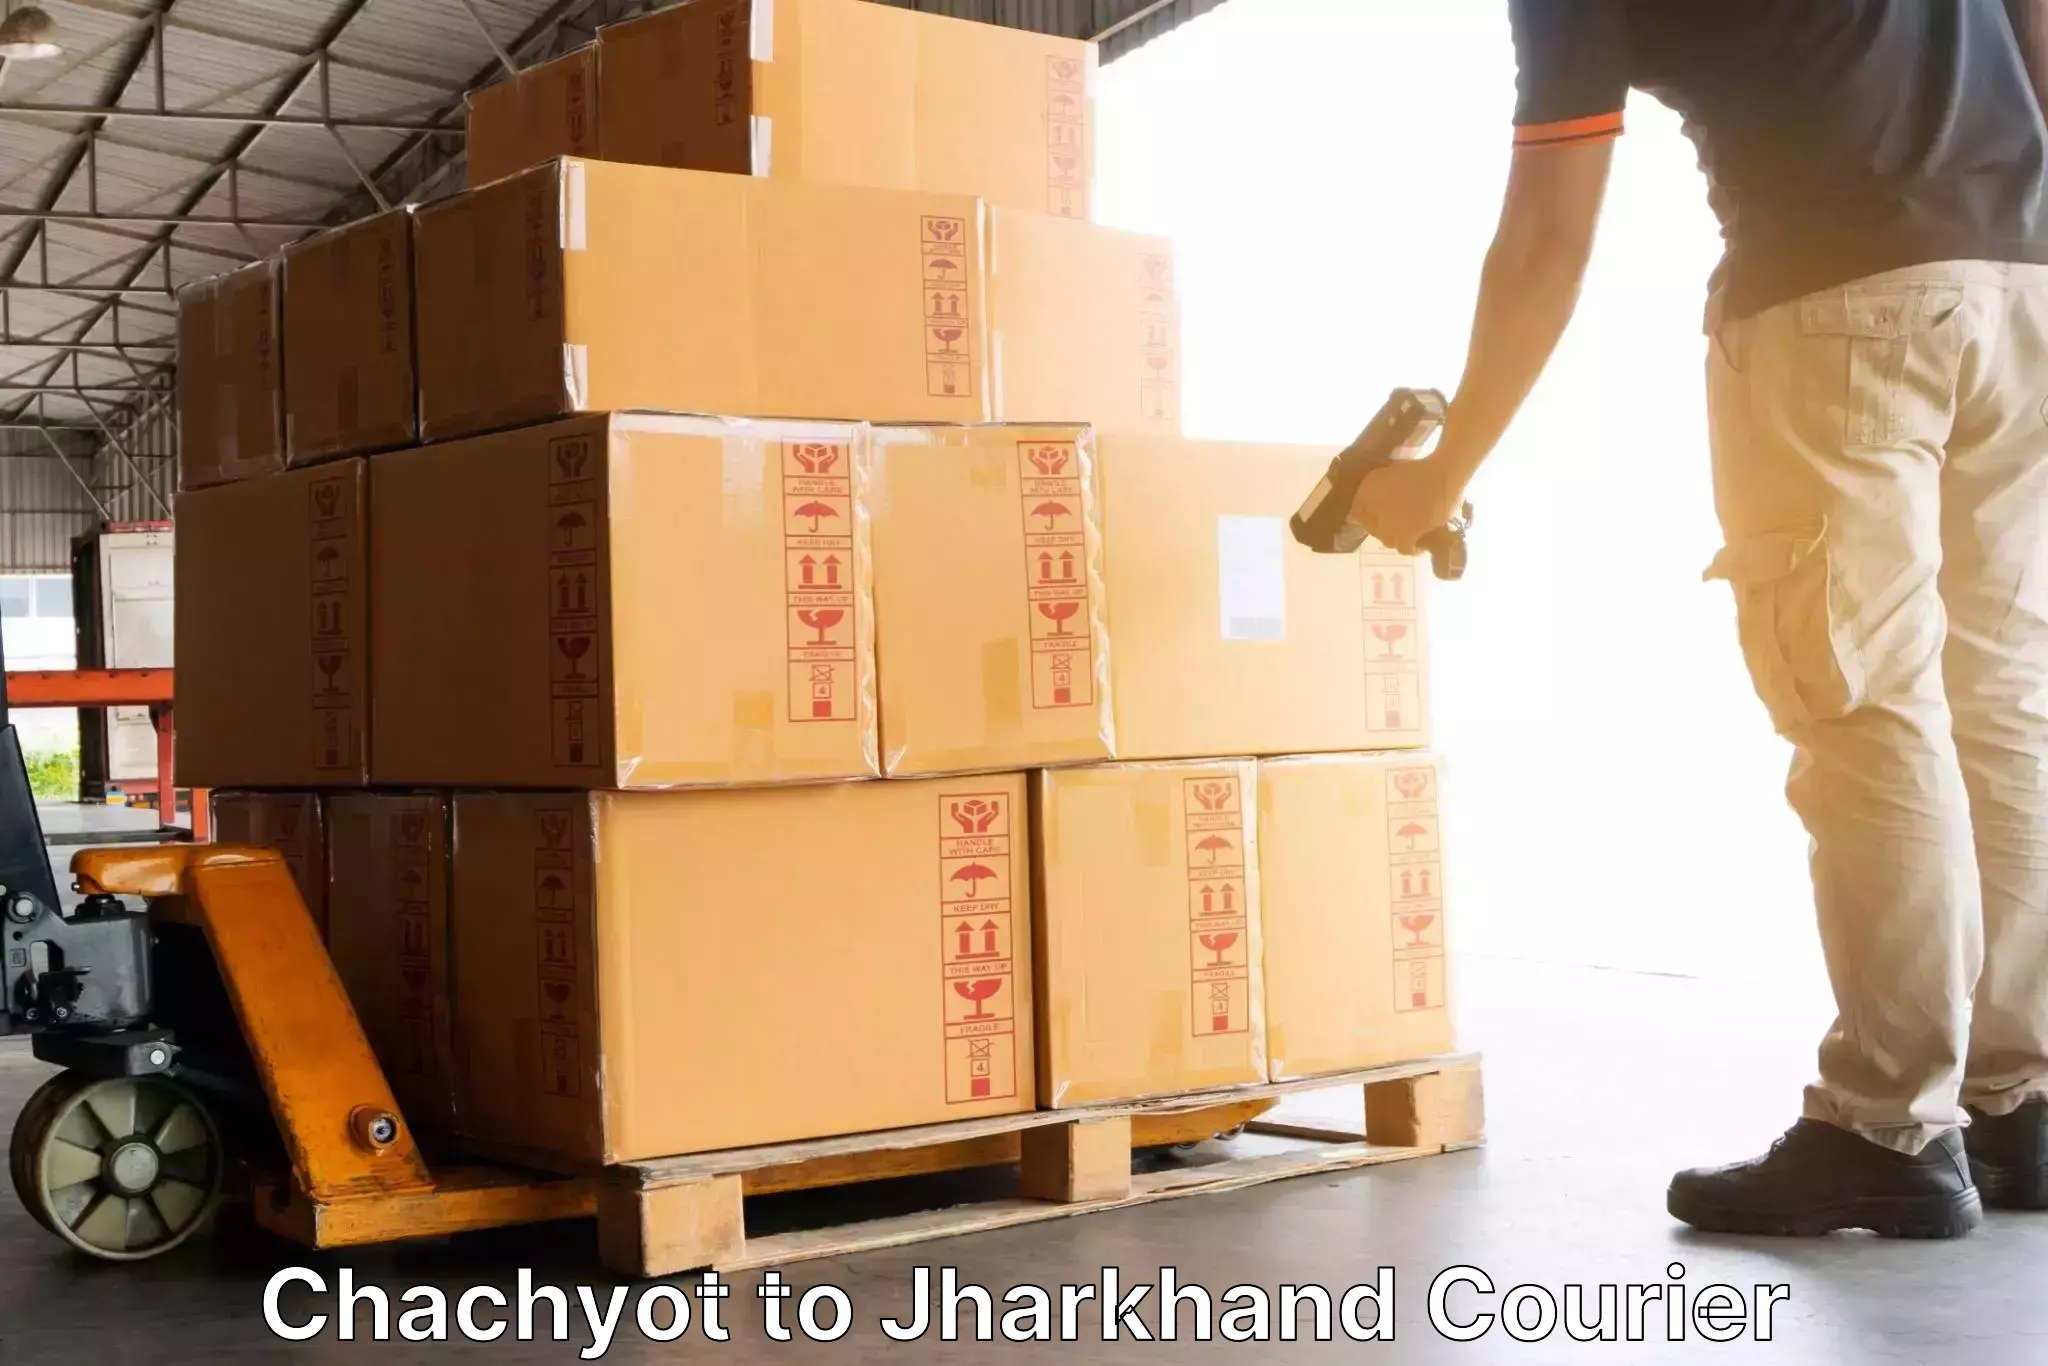 Express mail service Chachyot to Jharkhand